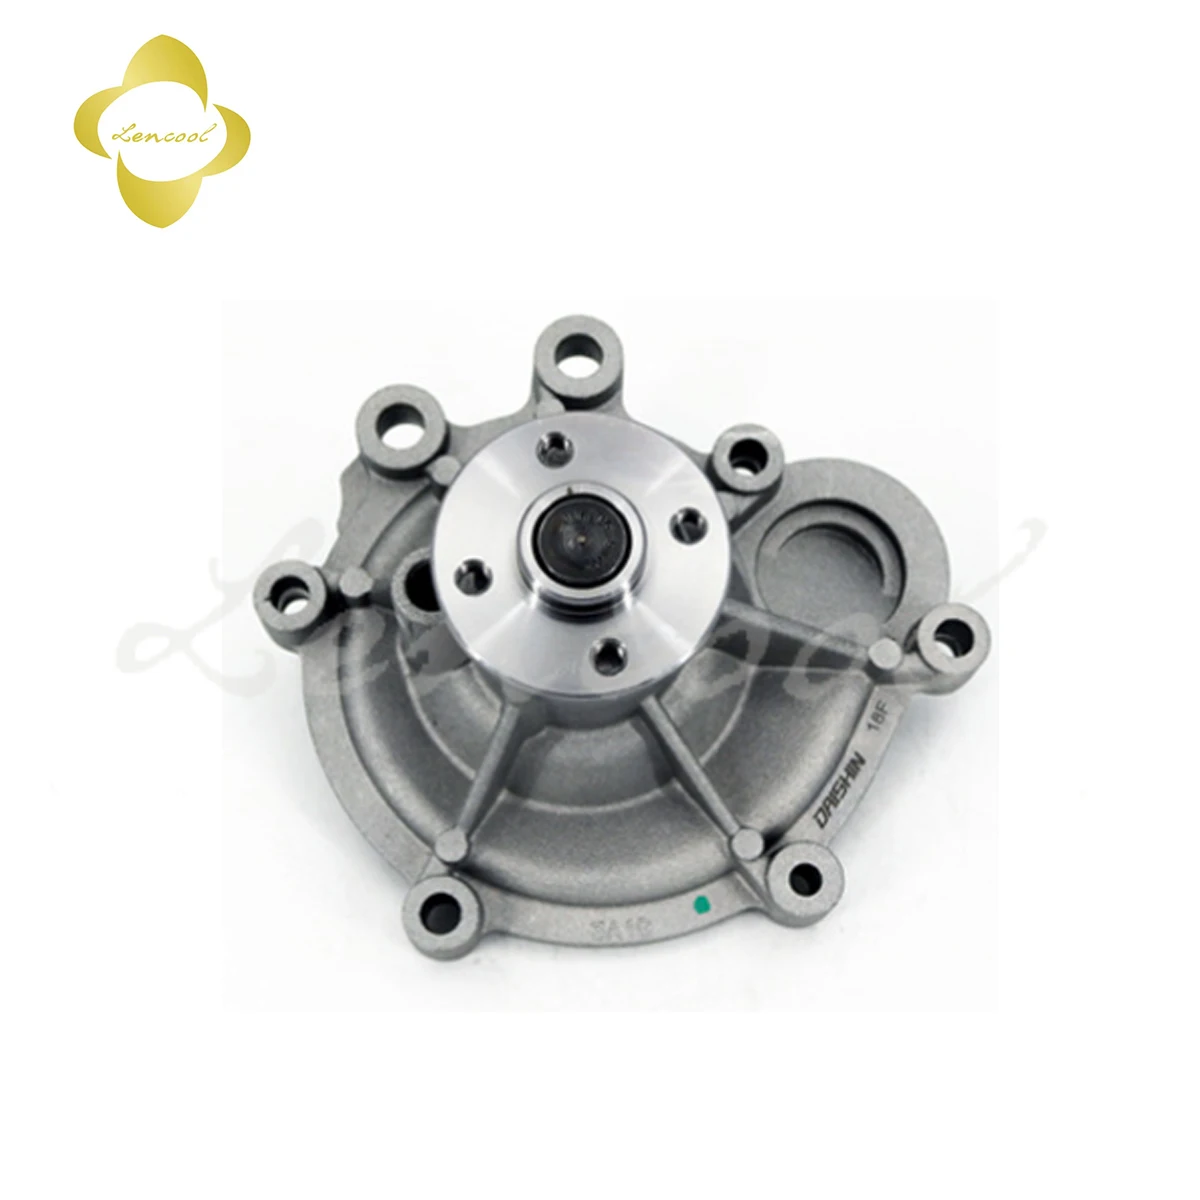 

Engine Cooling Water Pump For BENZ W203 W204 C200 C209 CLK W211 W212 E200 E250 R171 SLK M271 2712000401 A2712001001 2712000201